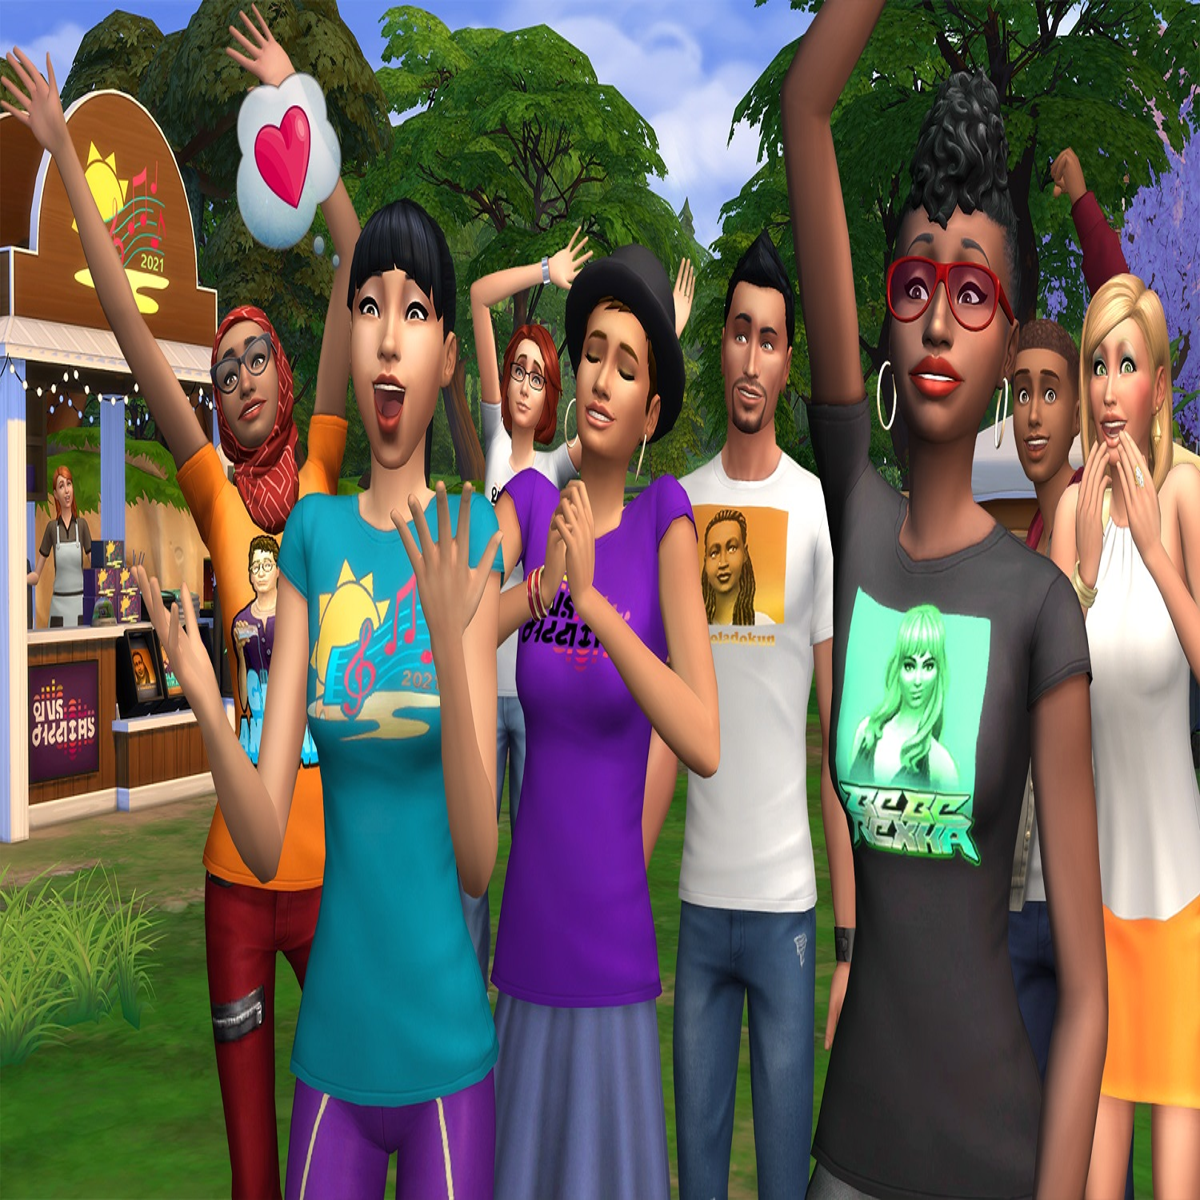 The Sims 4' is now free to play, so say goodbye to your social life